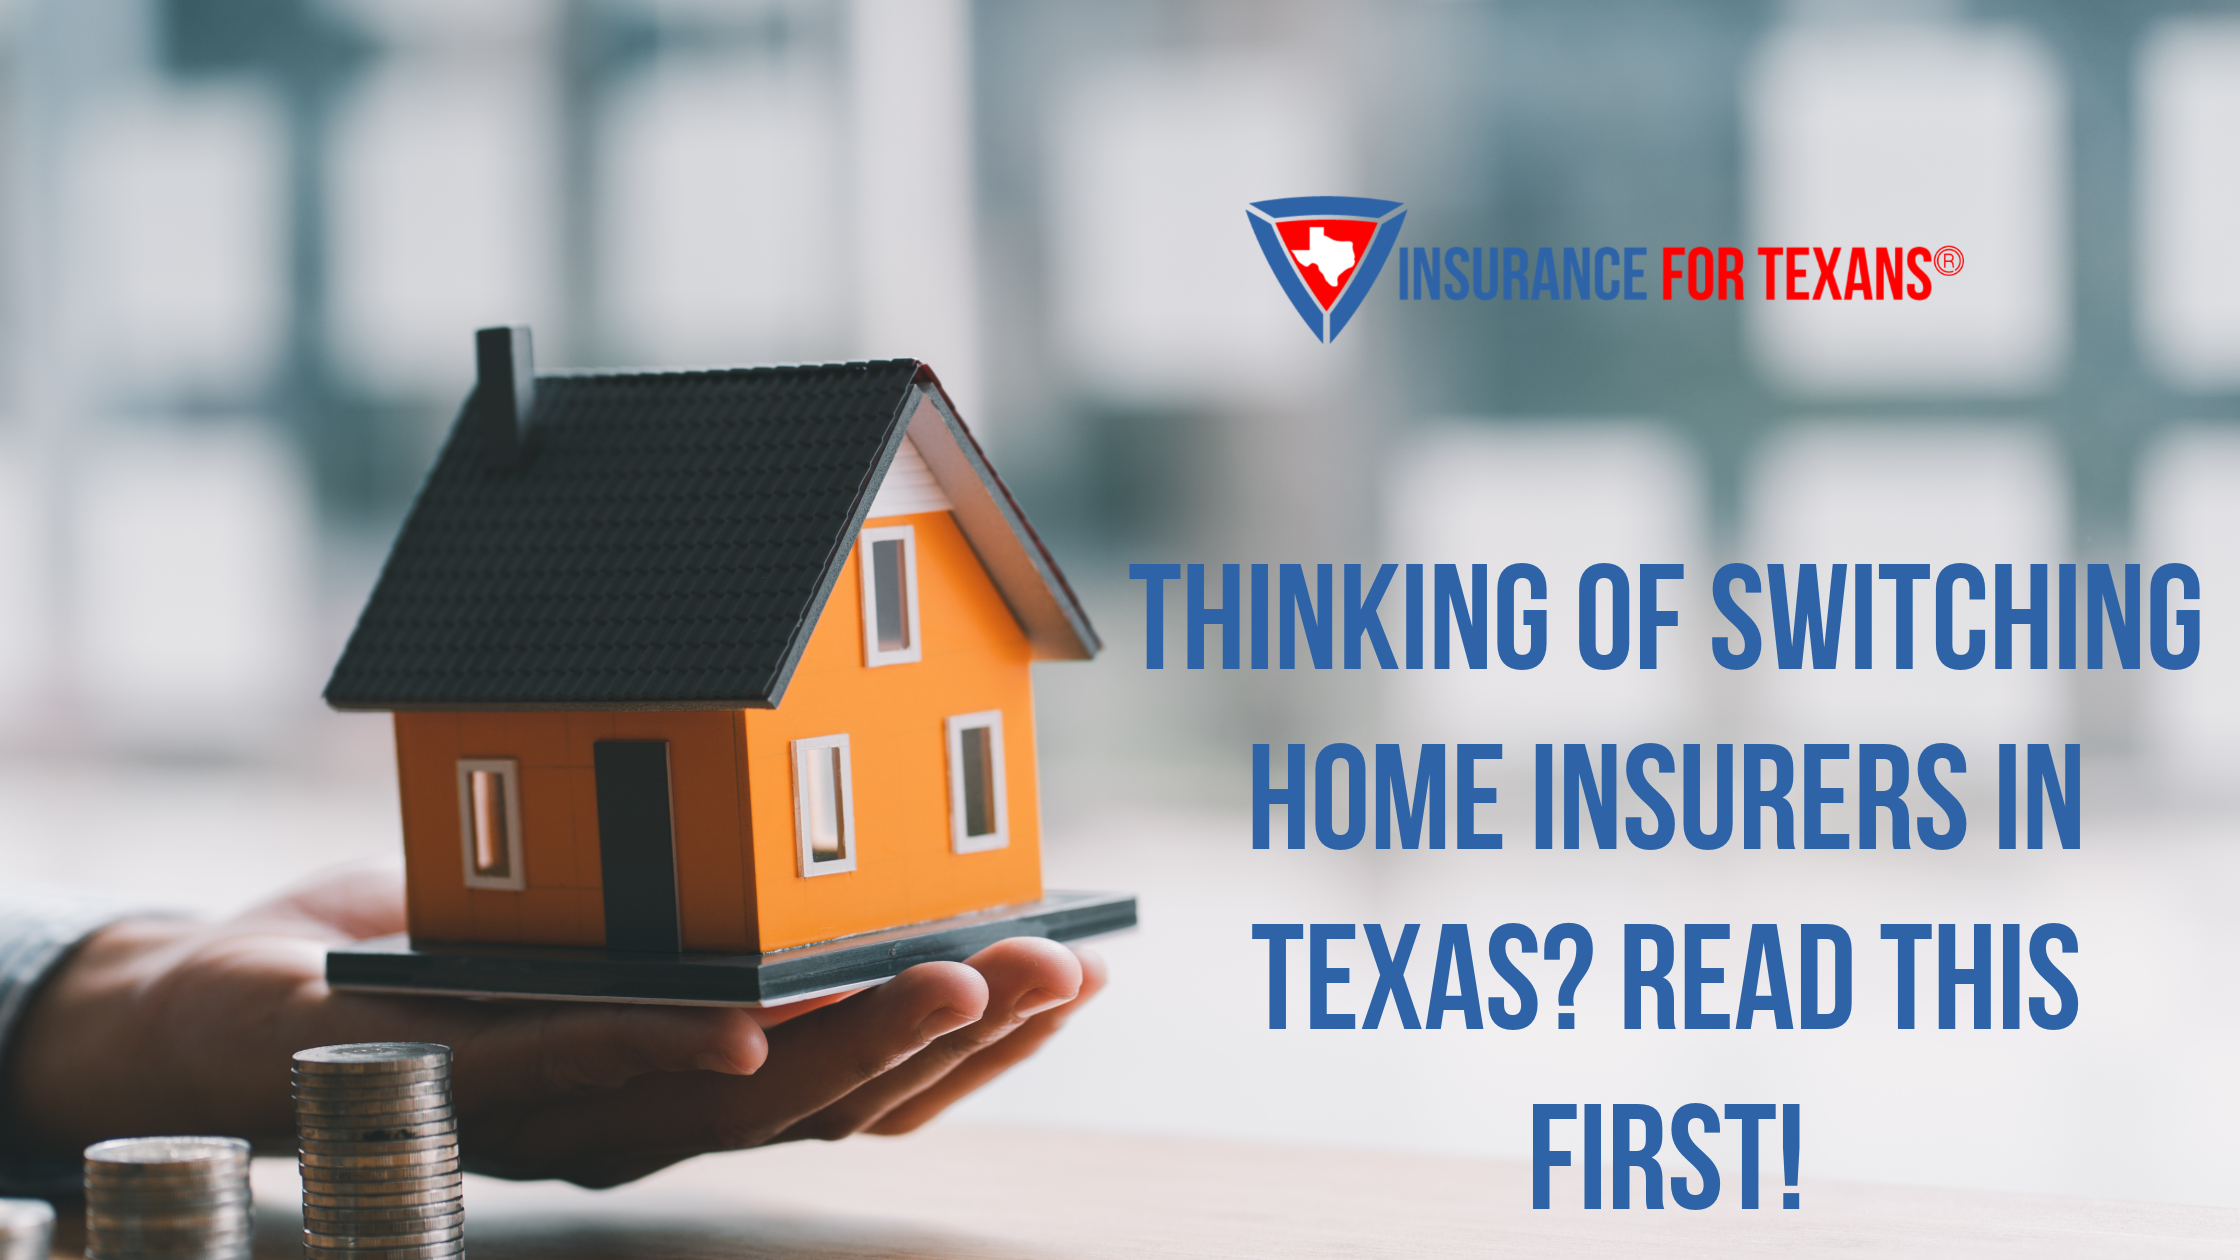 Thinking of Switching Home Insurers in Texas? Read This First!